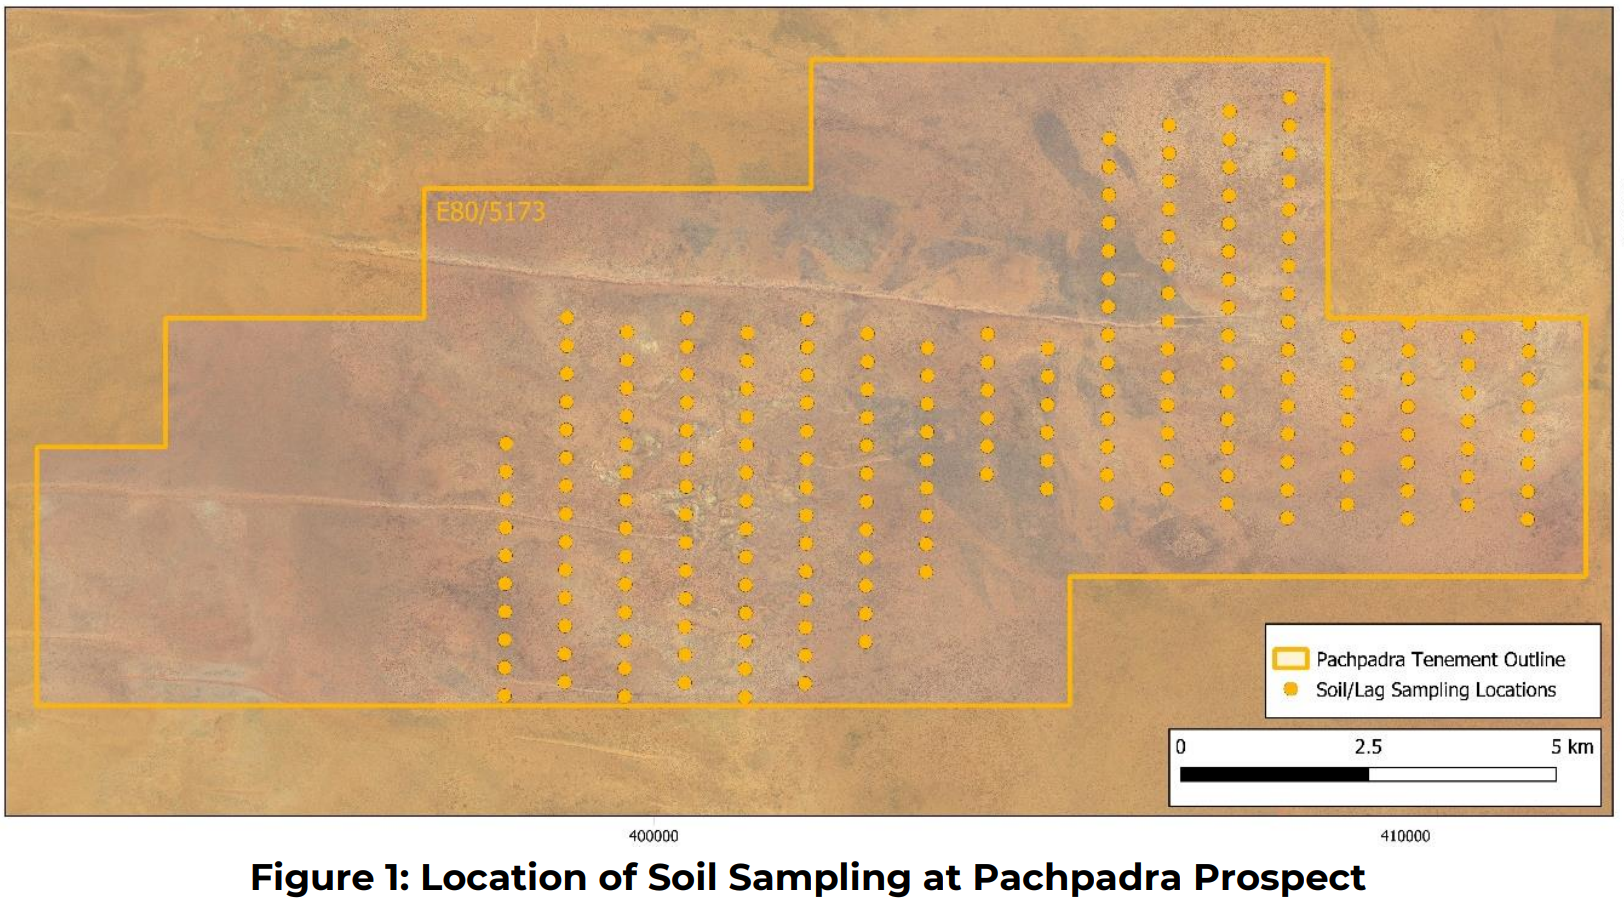 (Source: WA1 Resources) Map detailing the location of soil samples collected on-site Pachpadra 